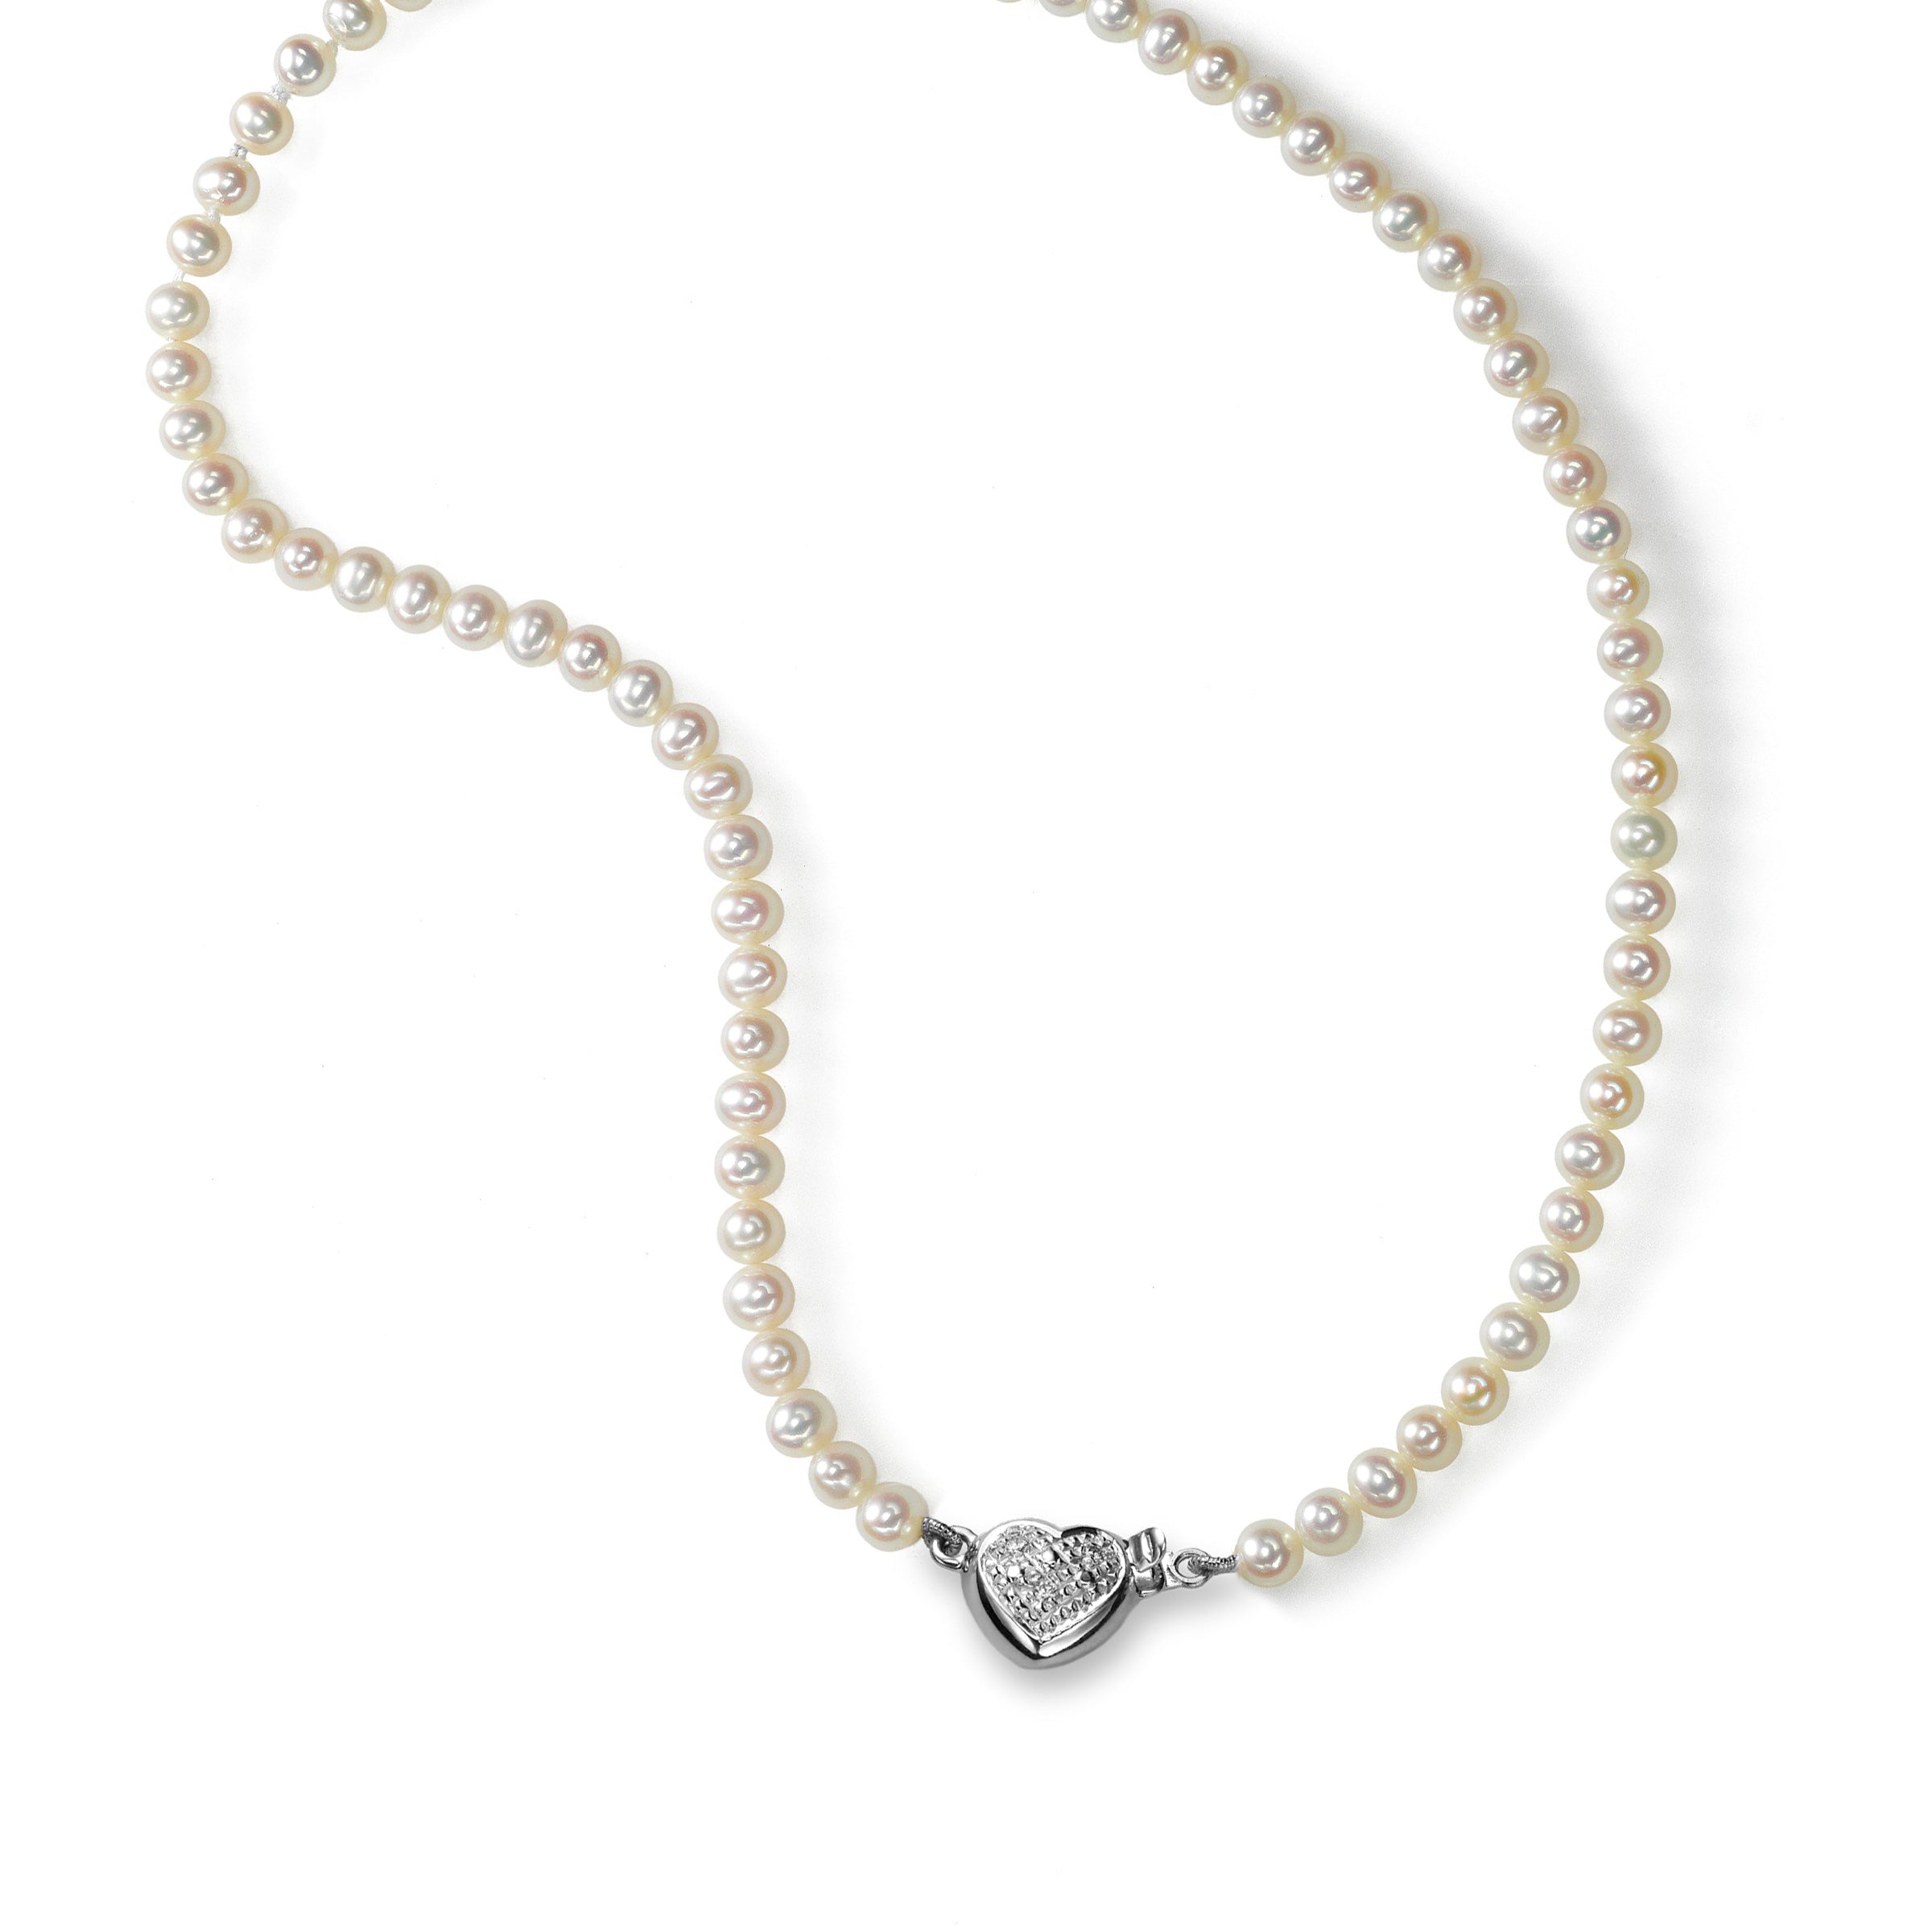 Girl's Pearl necklace